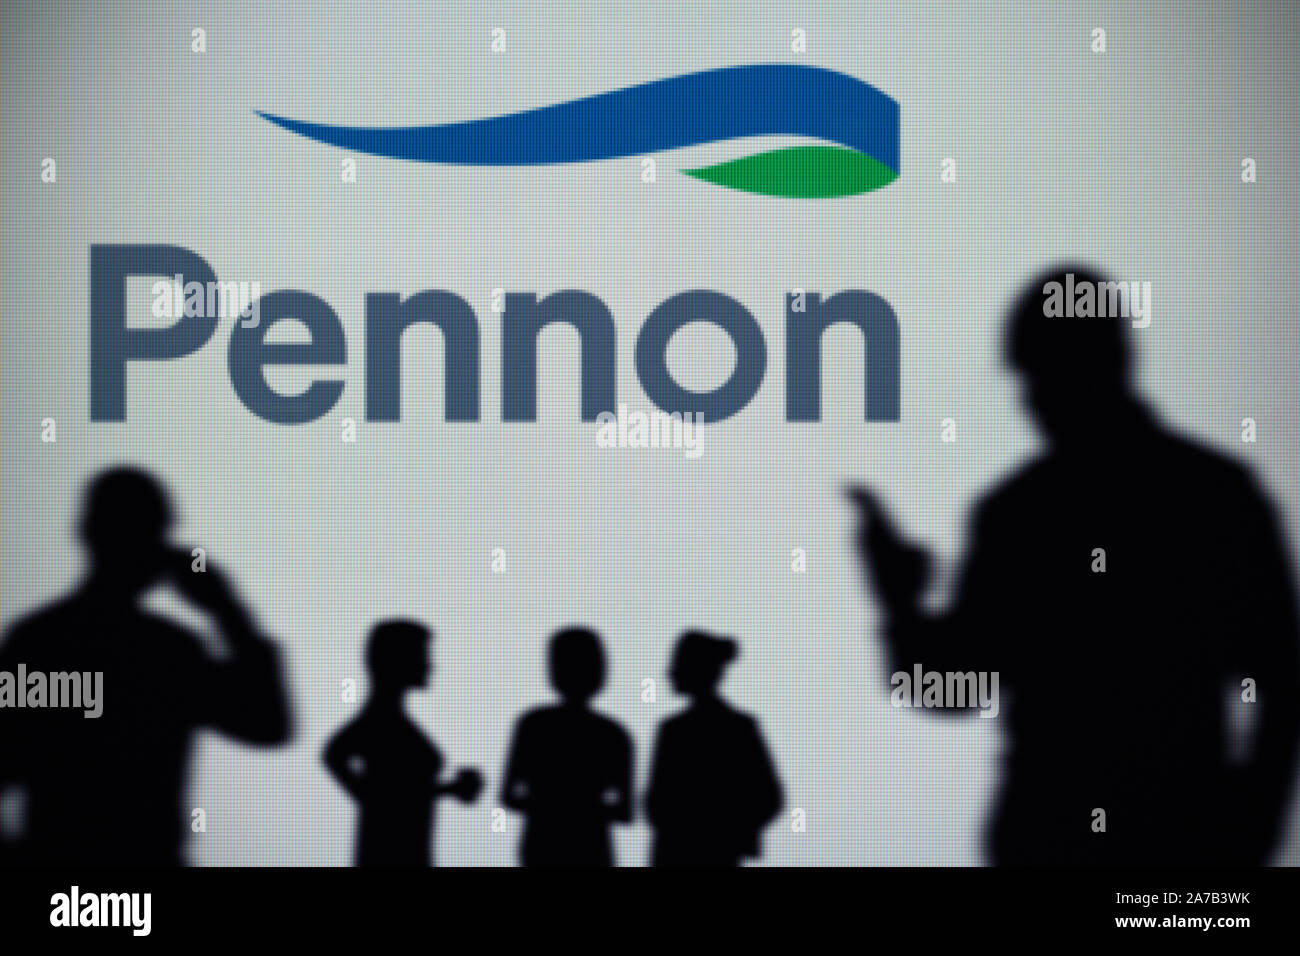 The Pennon Group logo is seen on an LED screen in the background while a silhouetted person uses a smartphone (Editorial use only) Stock Photo